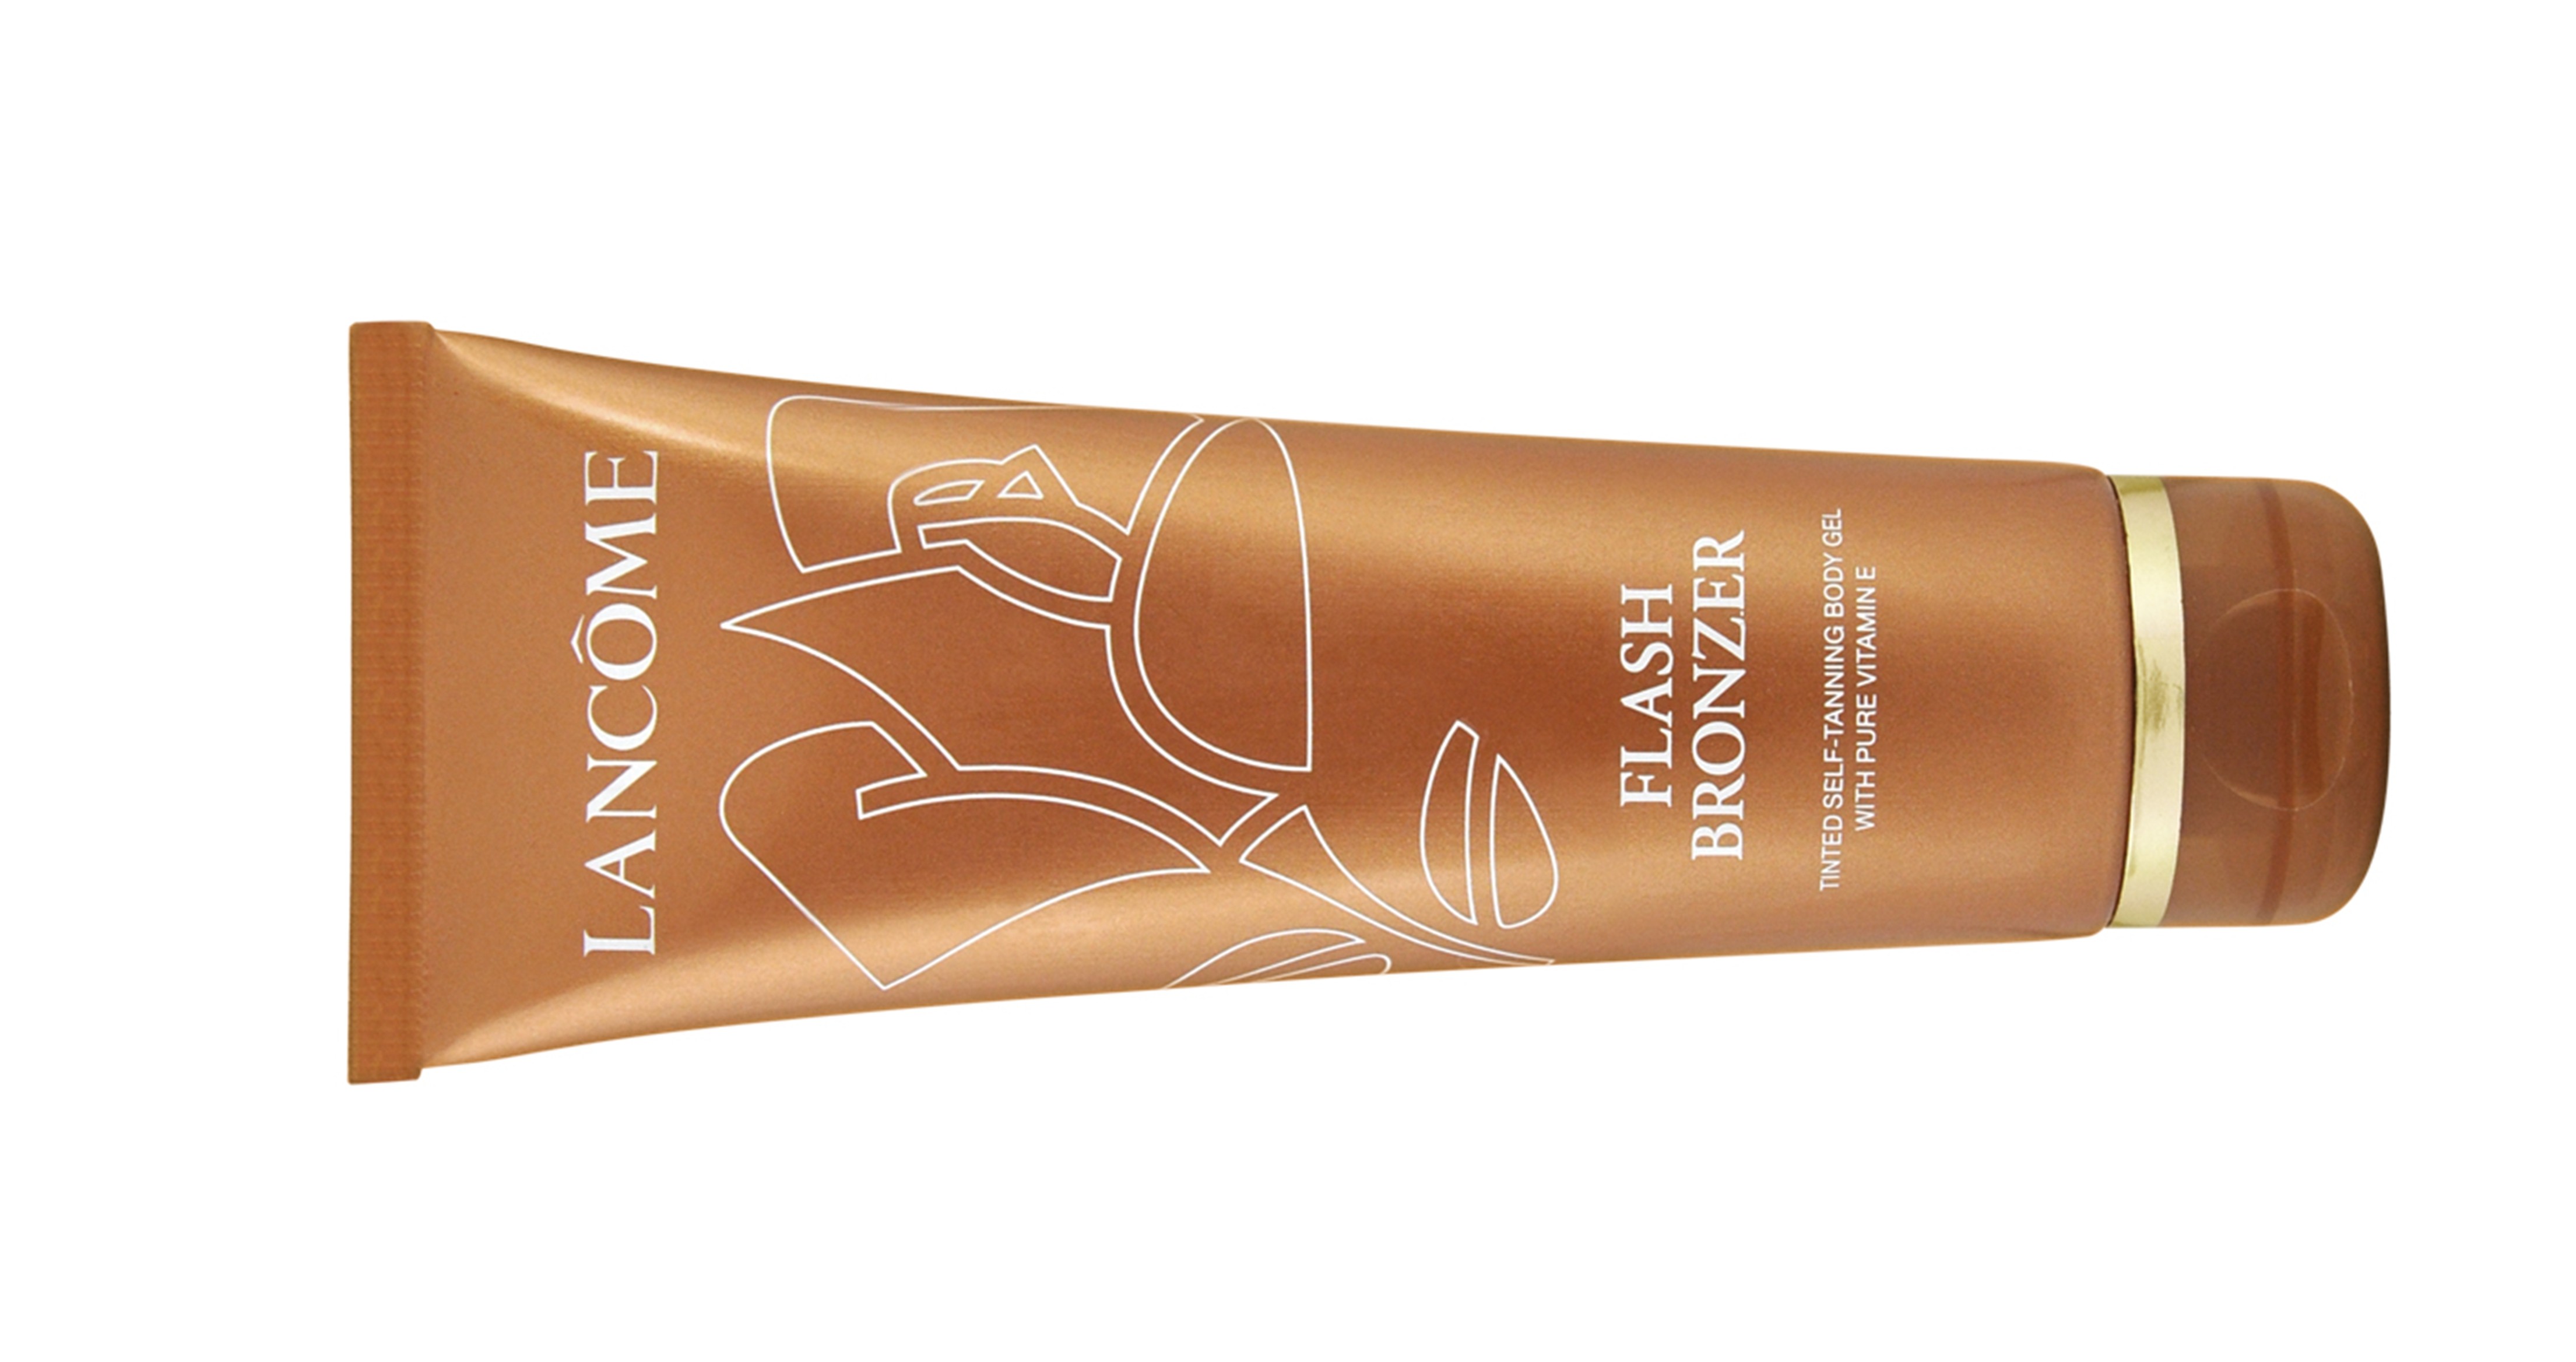 Self-Tanning This Summer with Flash Bronze Tinted Self-Tanner by Lancôme